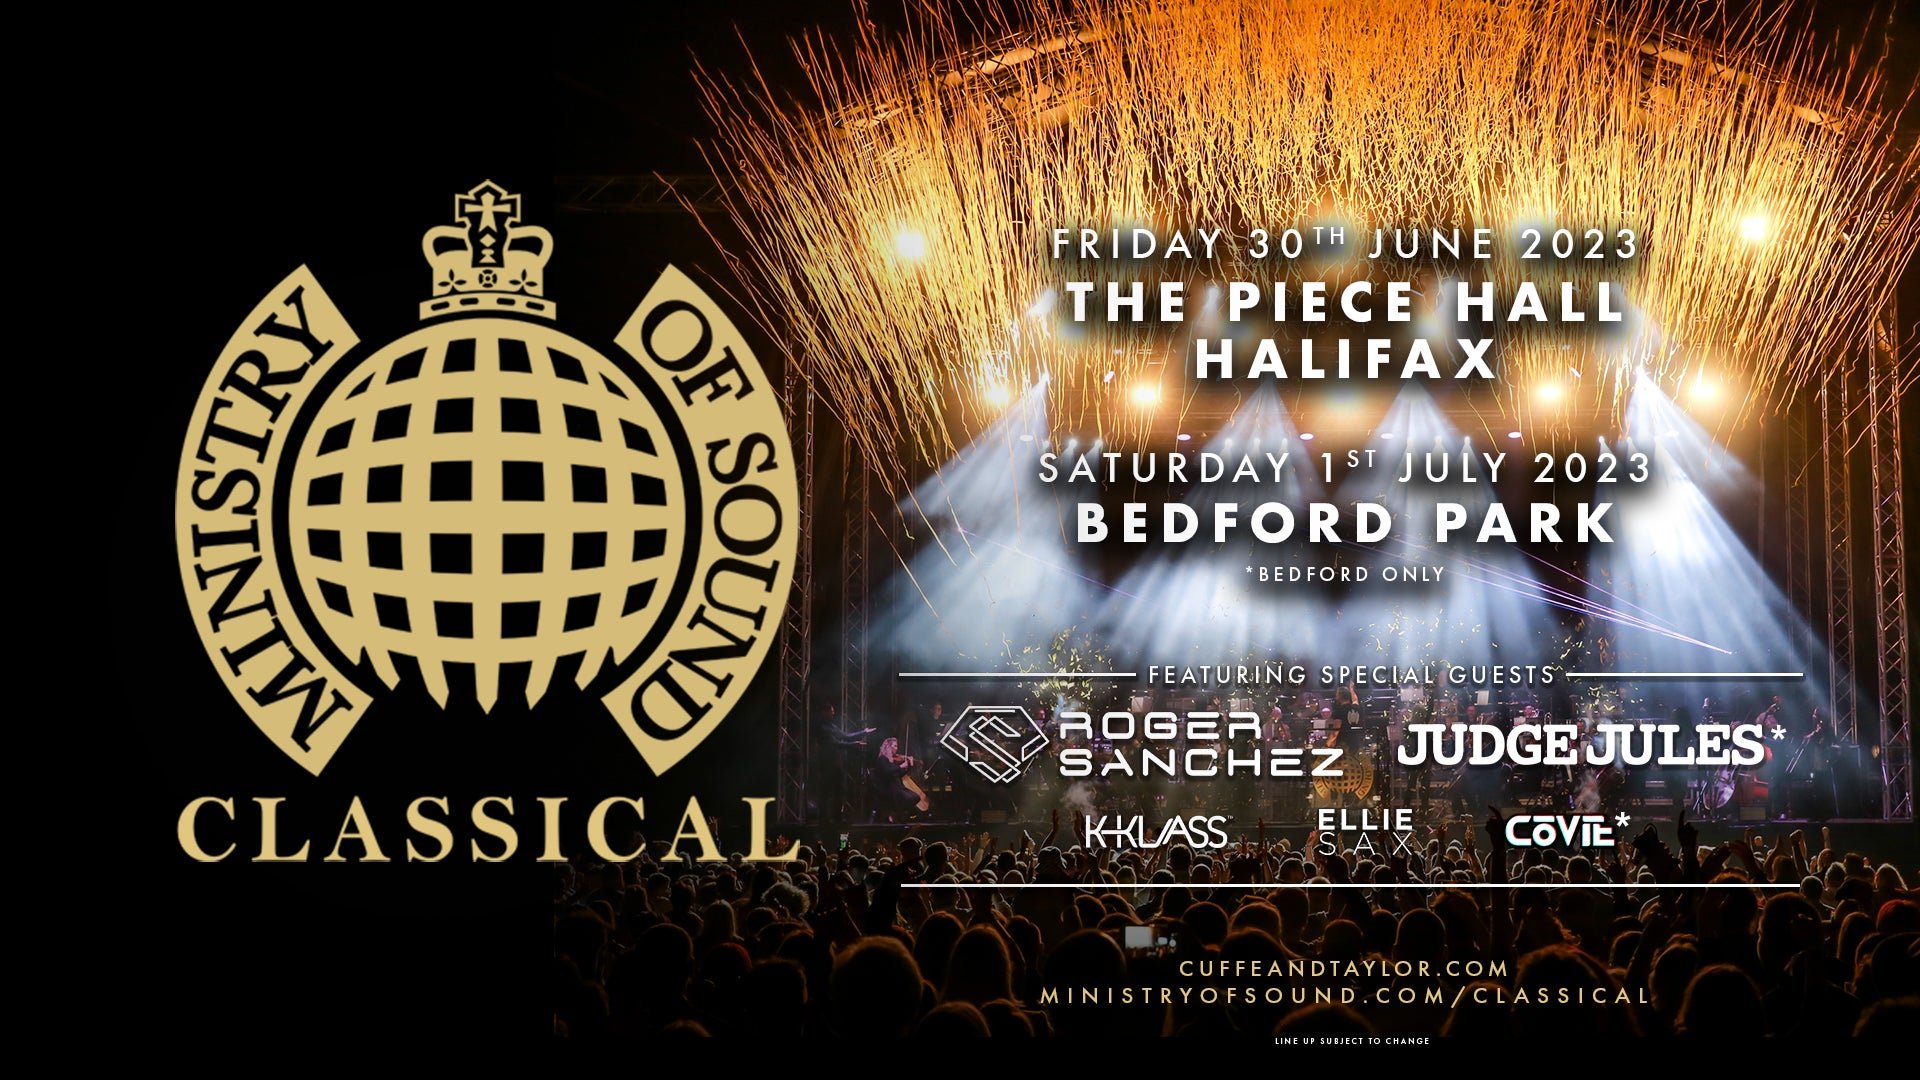 Image name Ministry of Sound Classical at The Piece Hall the 1 image from the post Ministry of Sound Classical at The Piece Hall, Halifax in Yorkshire.com.